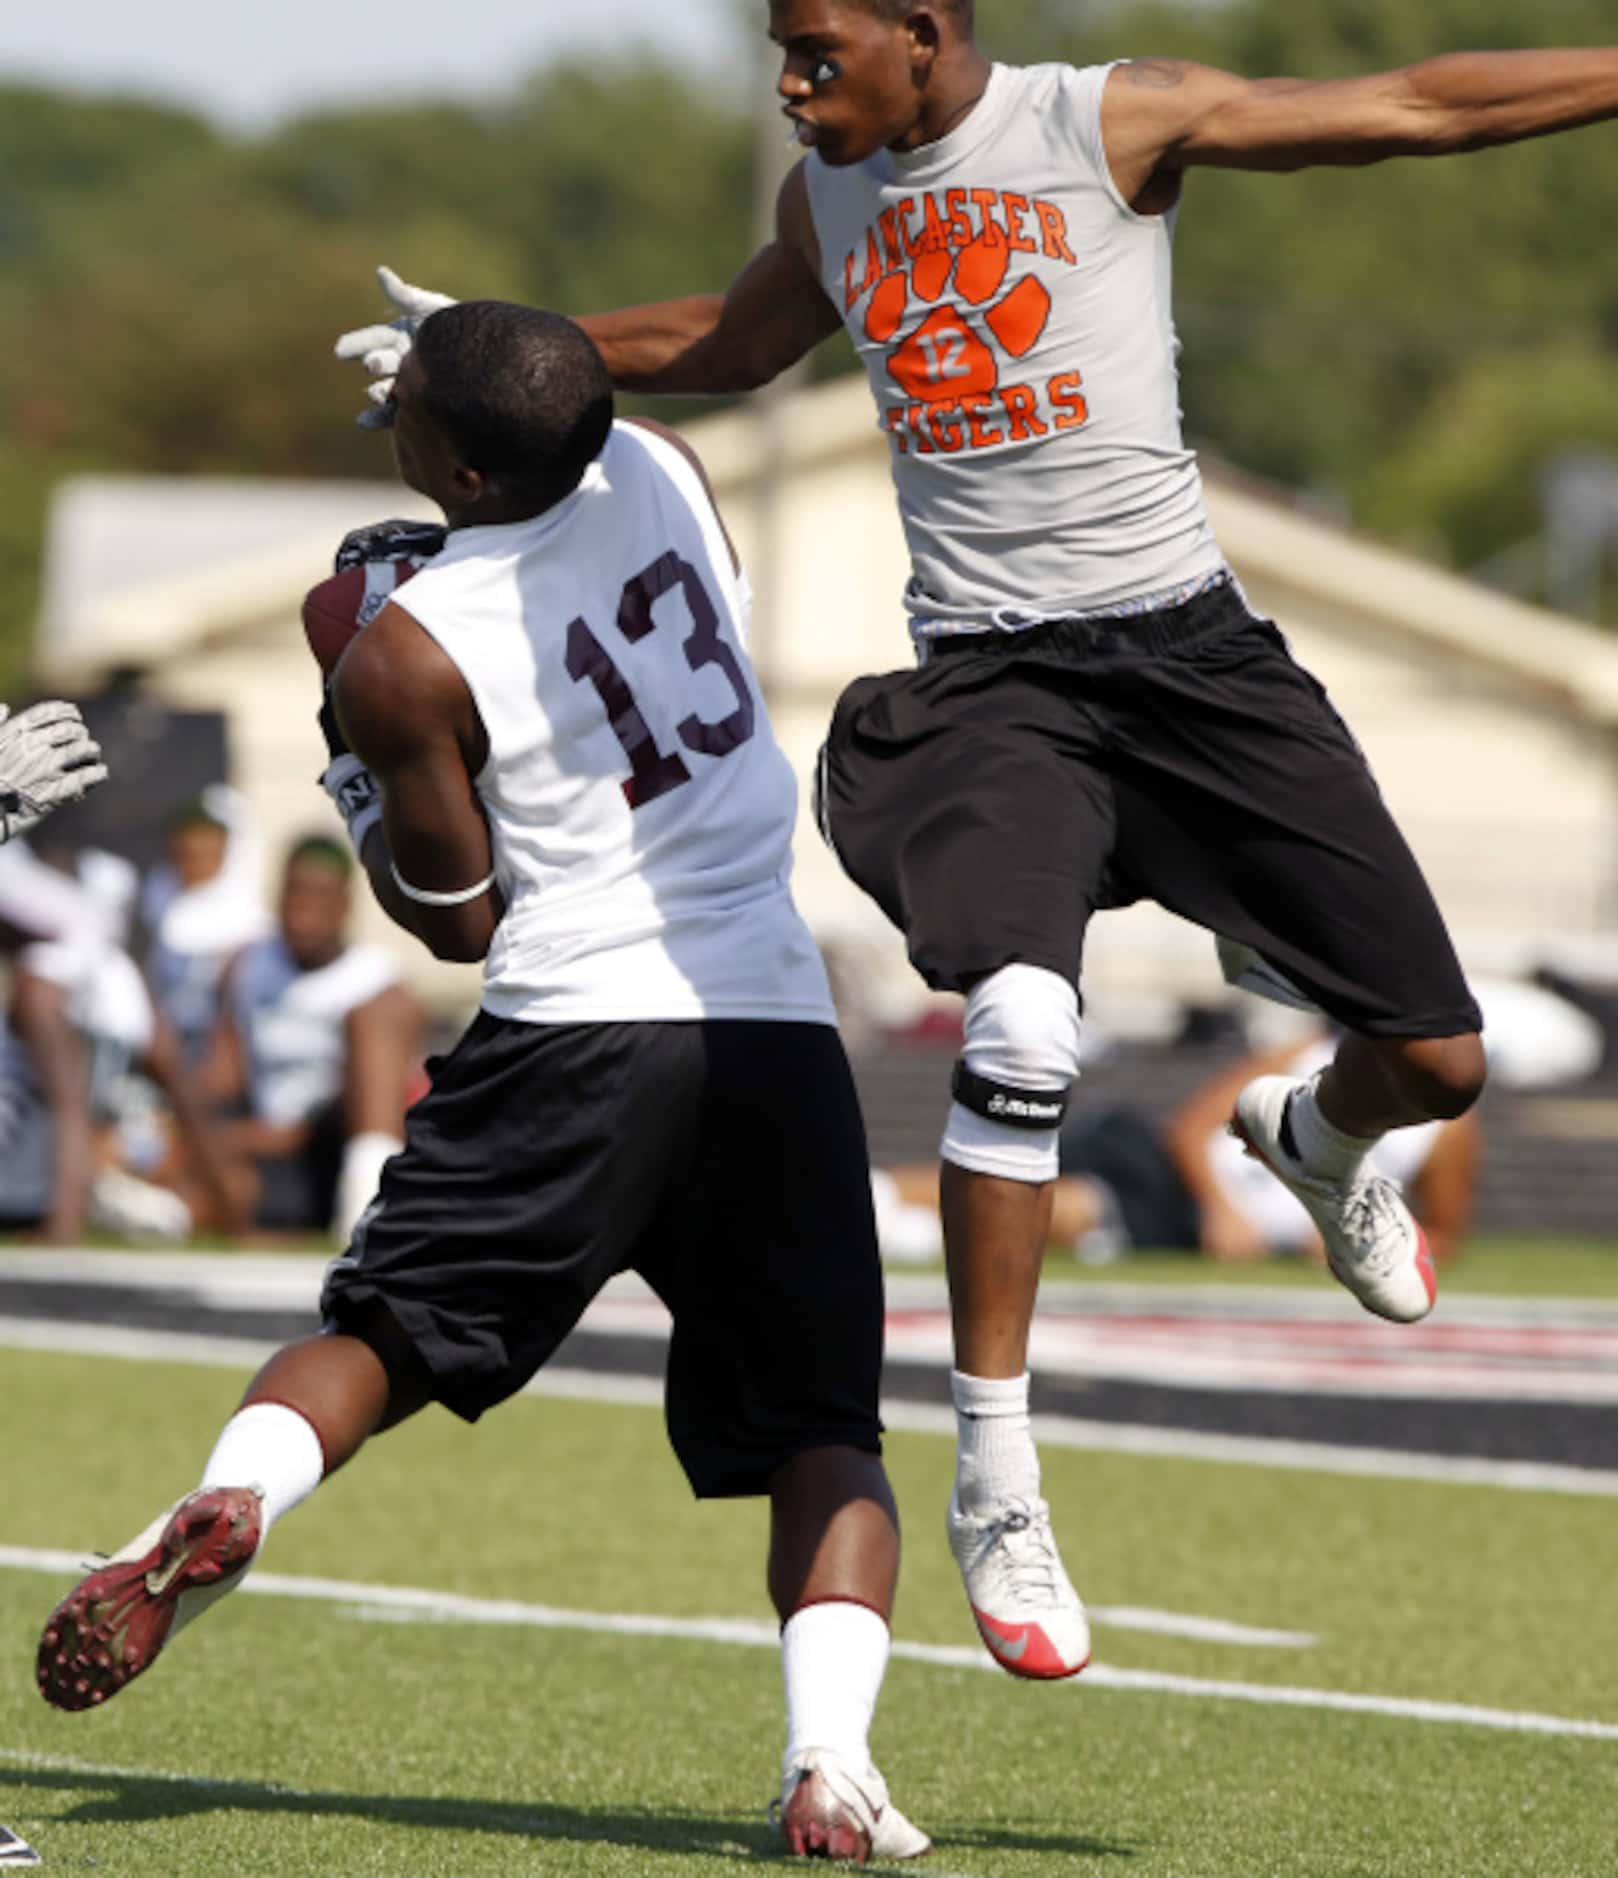 Plano receiver Lj Ausama (13, right) catches an arm in the face by Lancaster defender...